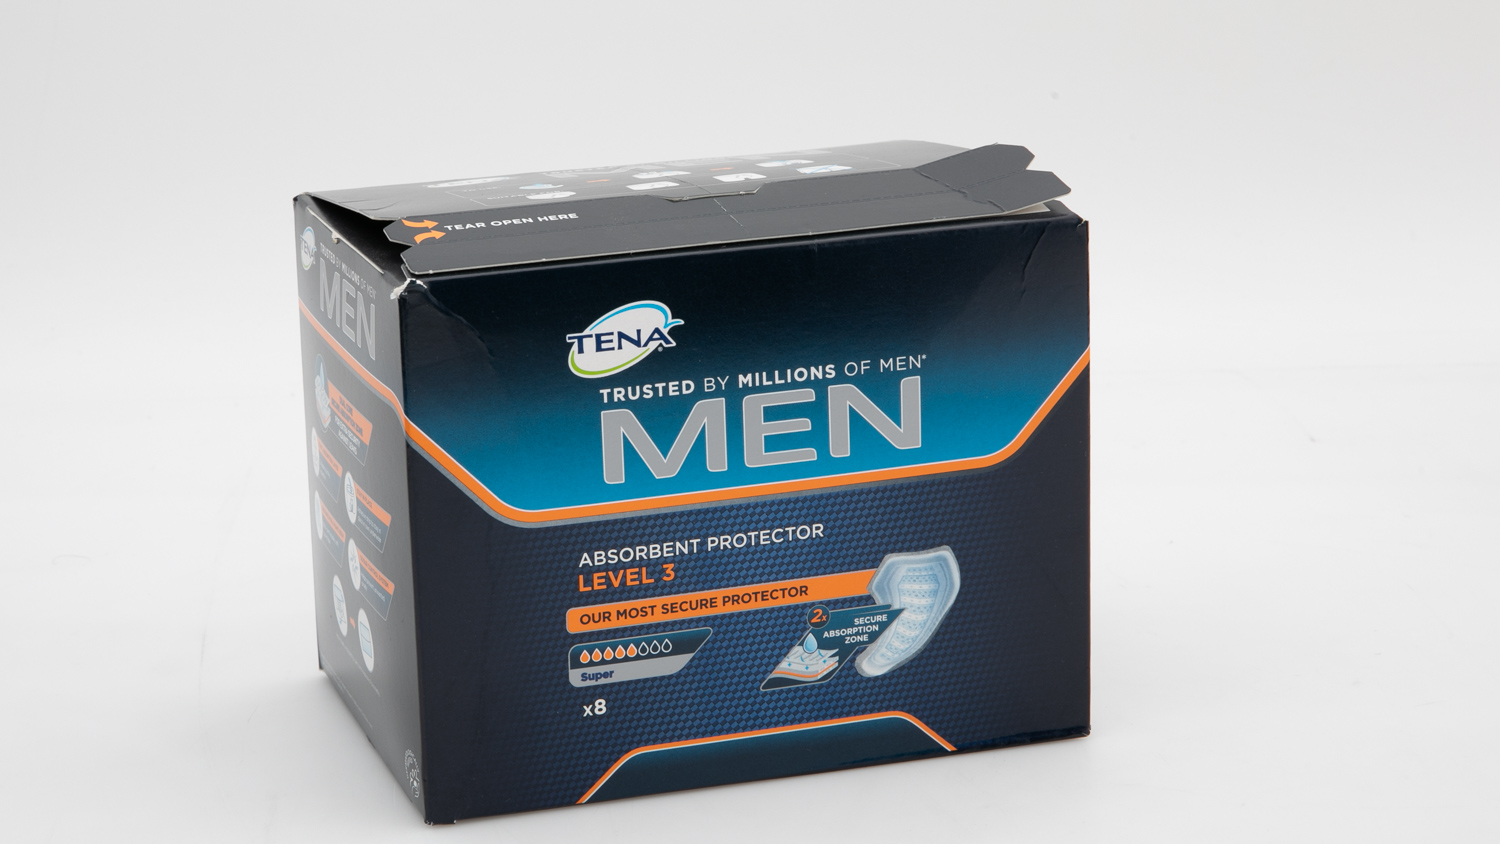 Tena Men Absorbent Protector Level 3 Review, Incontinence pad